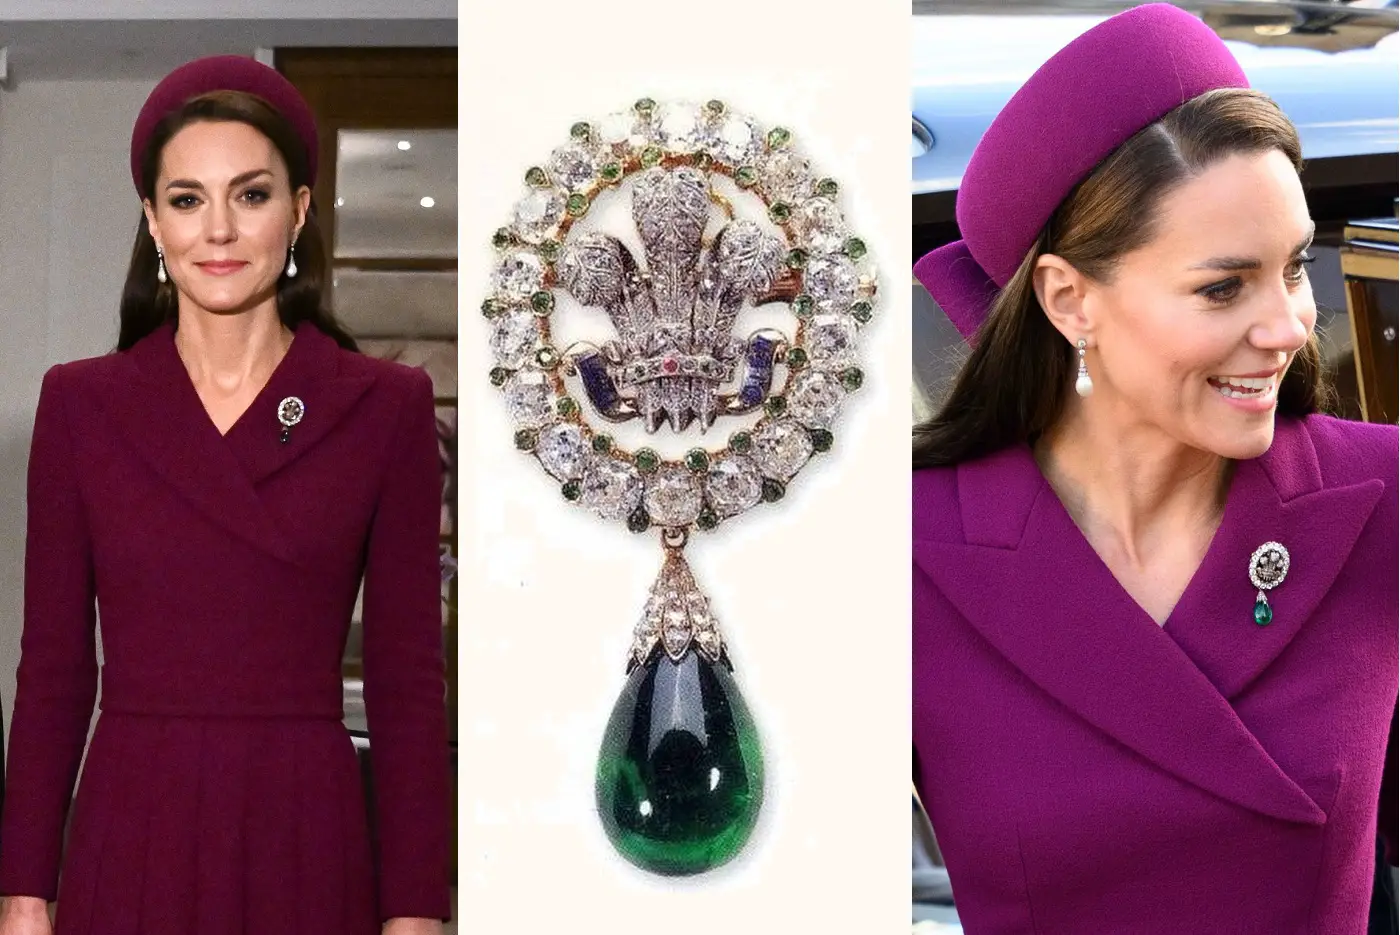 The Princess of Wales Catherine wore The Prince of Wales Feathers Brooch